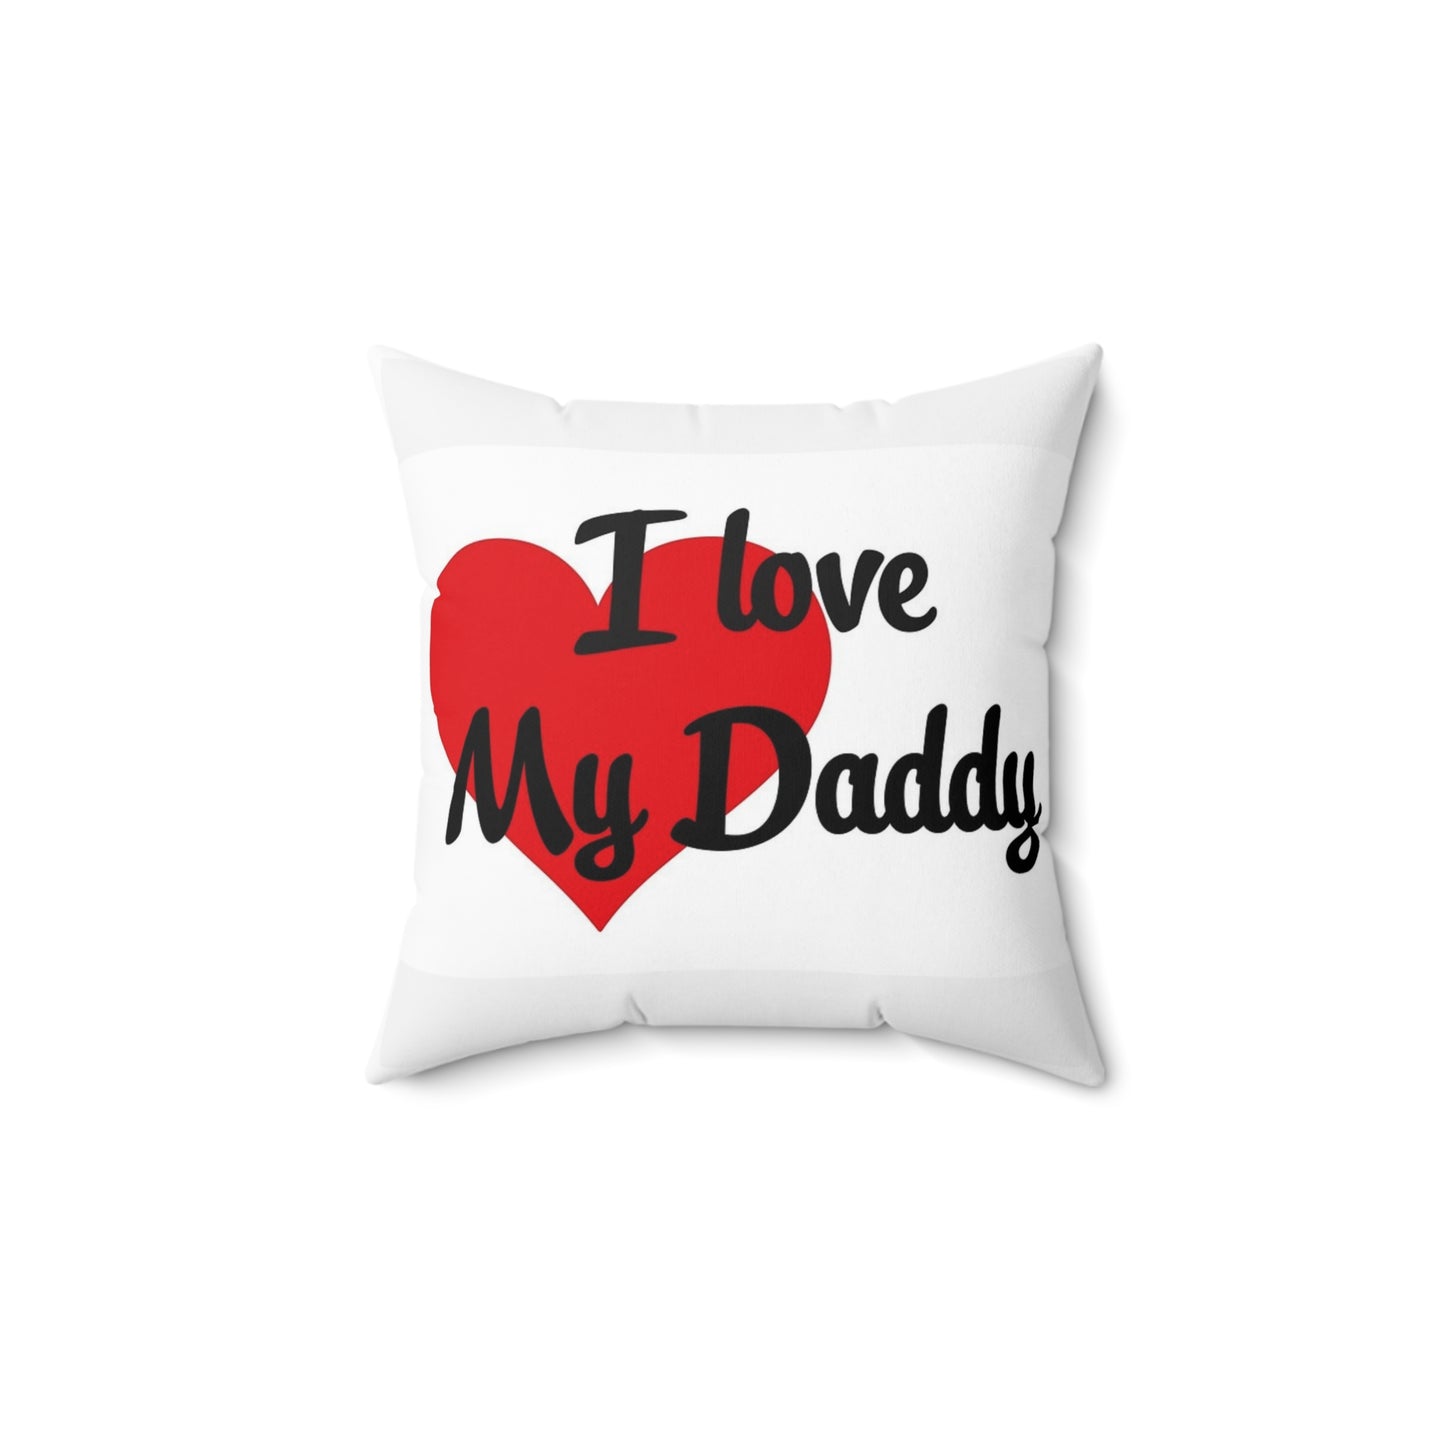 I Love My Dad - Faux Suede Square Pillow